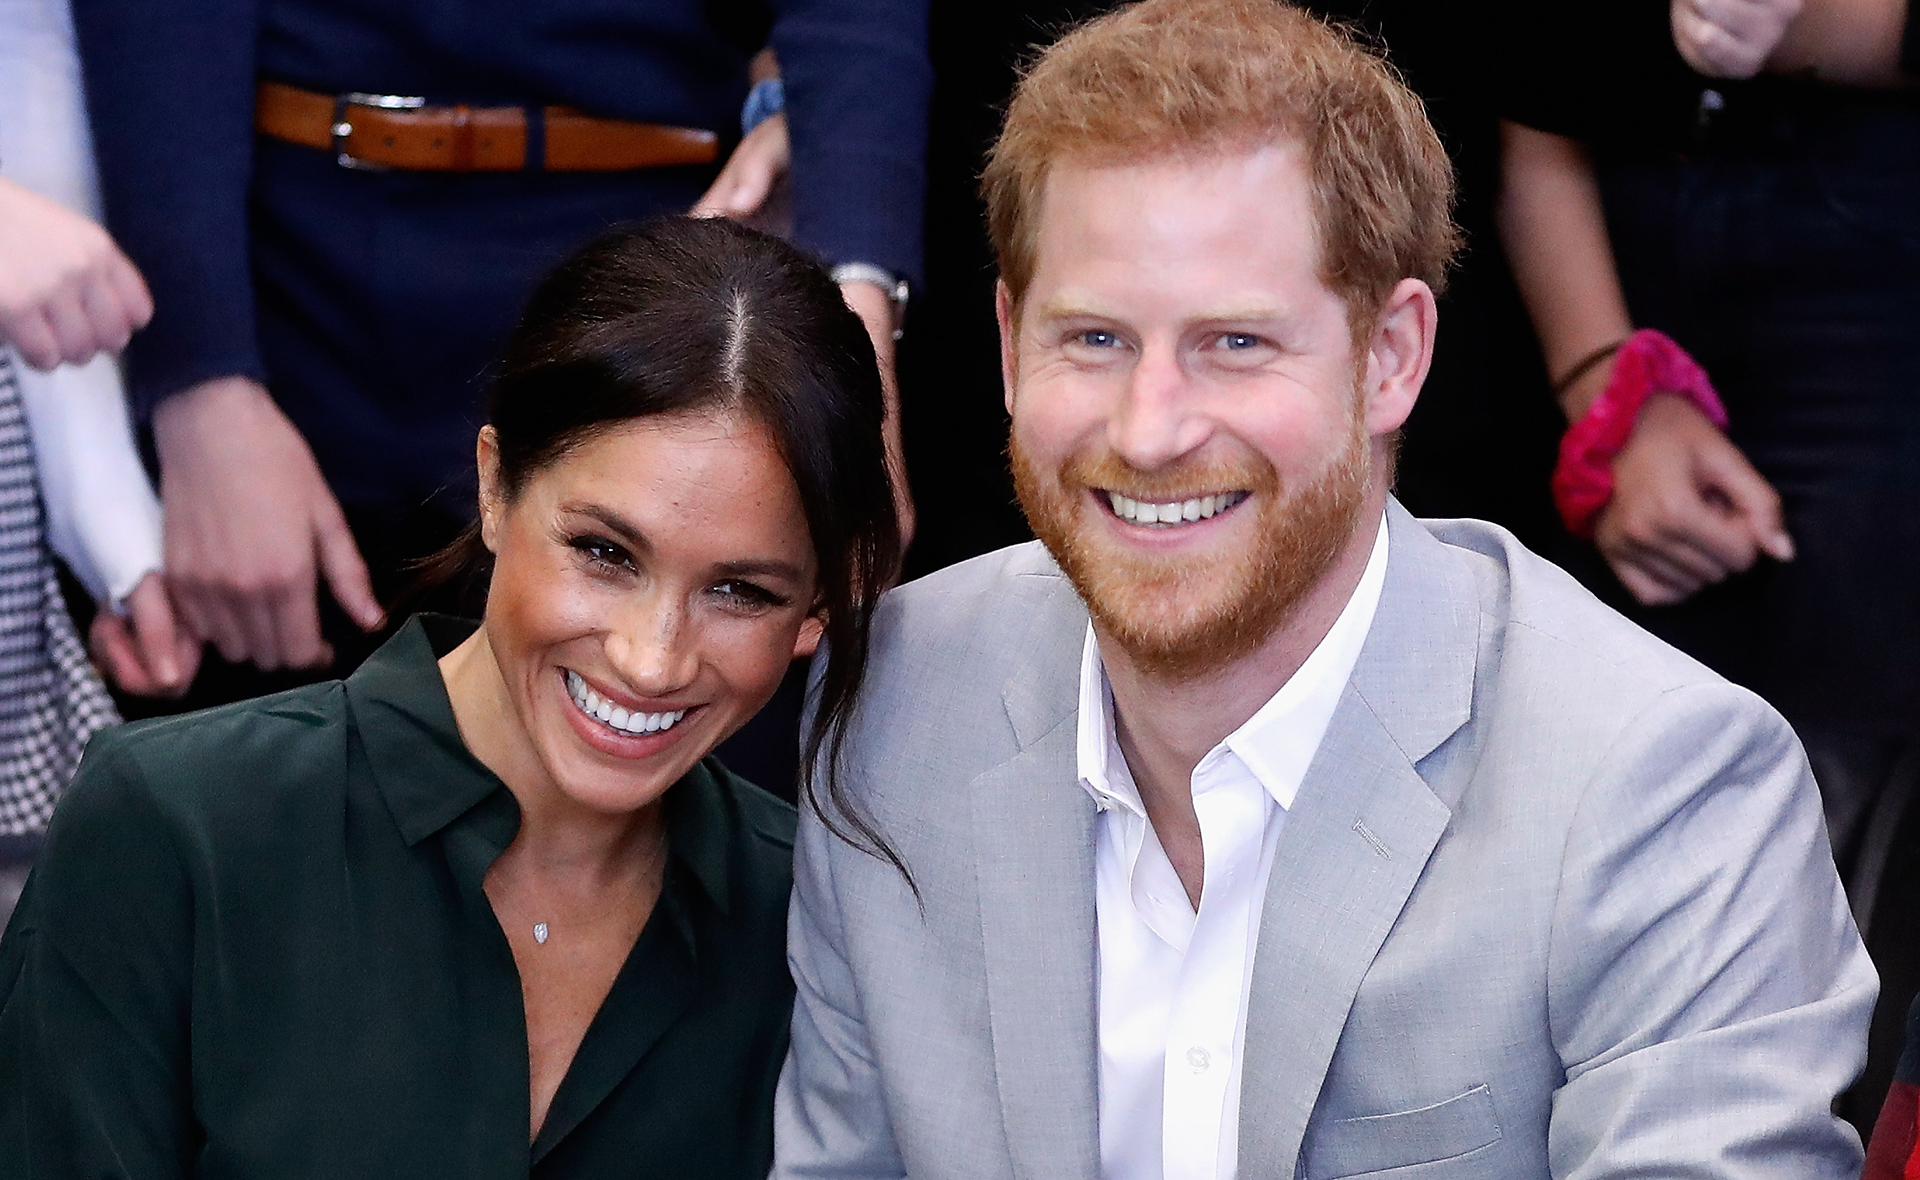 Prince Harry and Duchess Meghan “excited” to start a new chapter after Lilibet’s birth